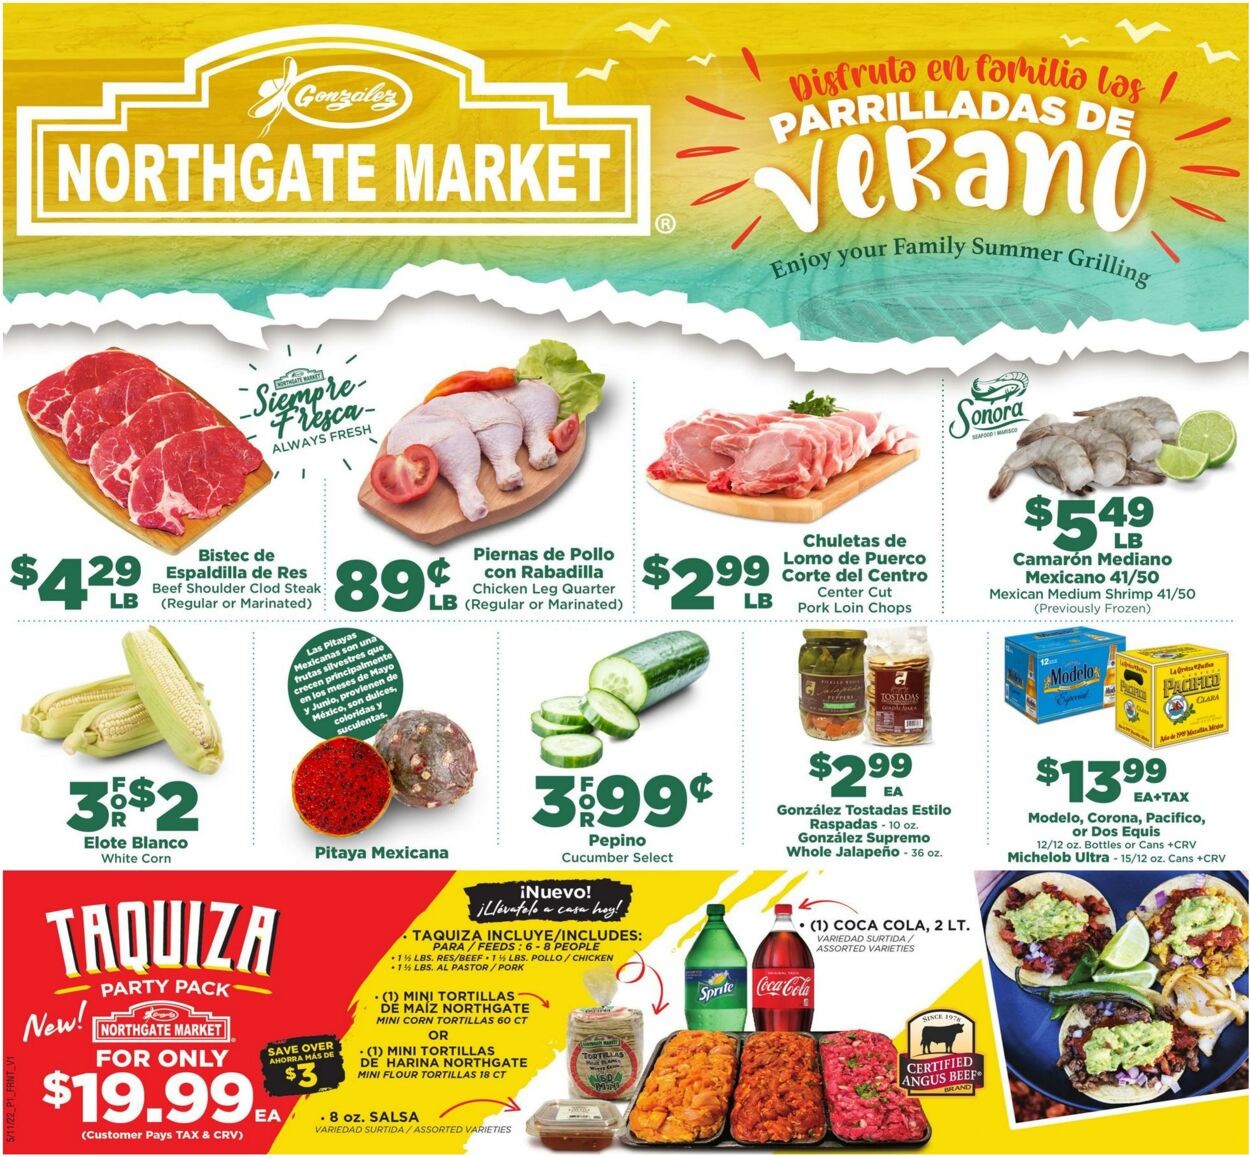 Northgate Market Promotional weekly ads